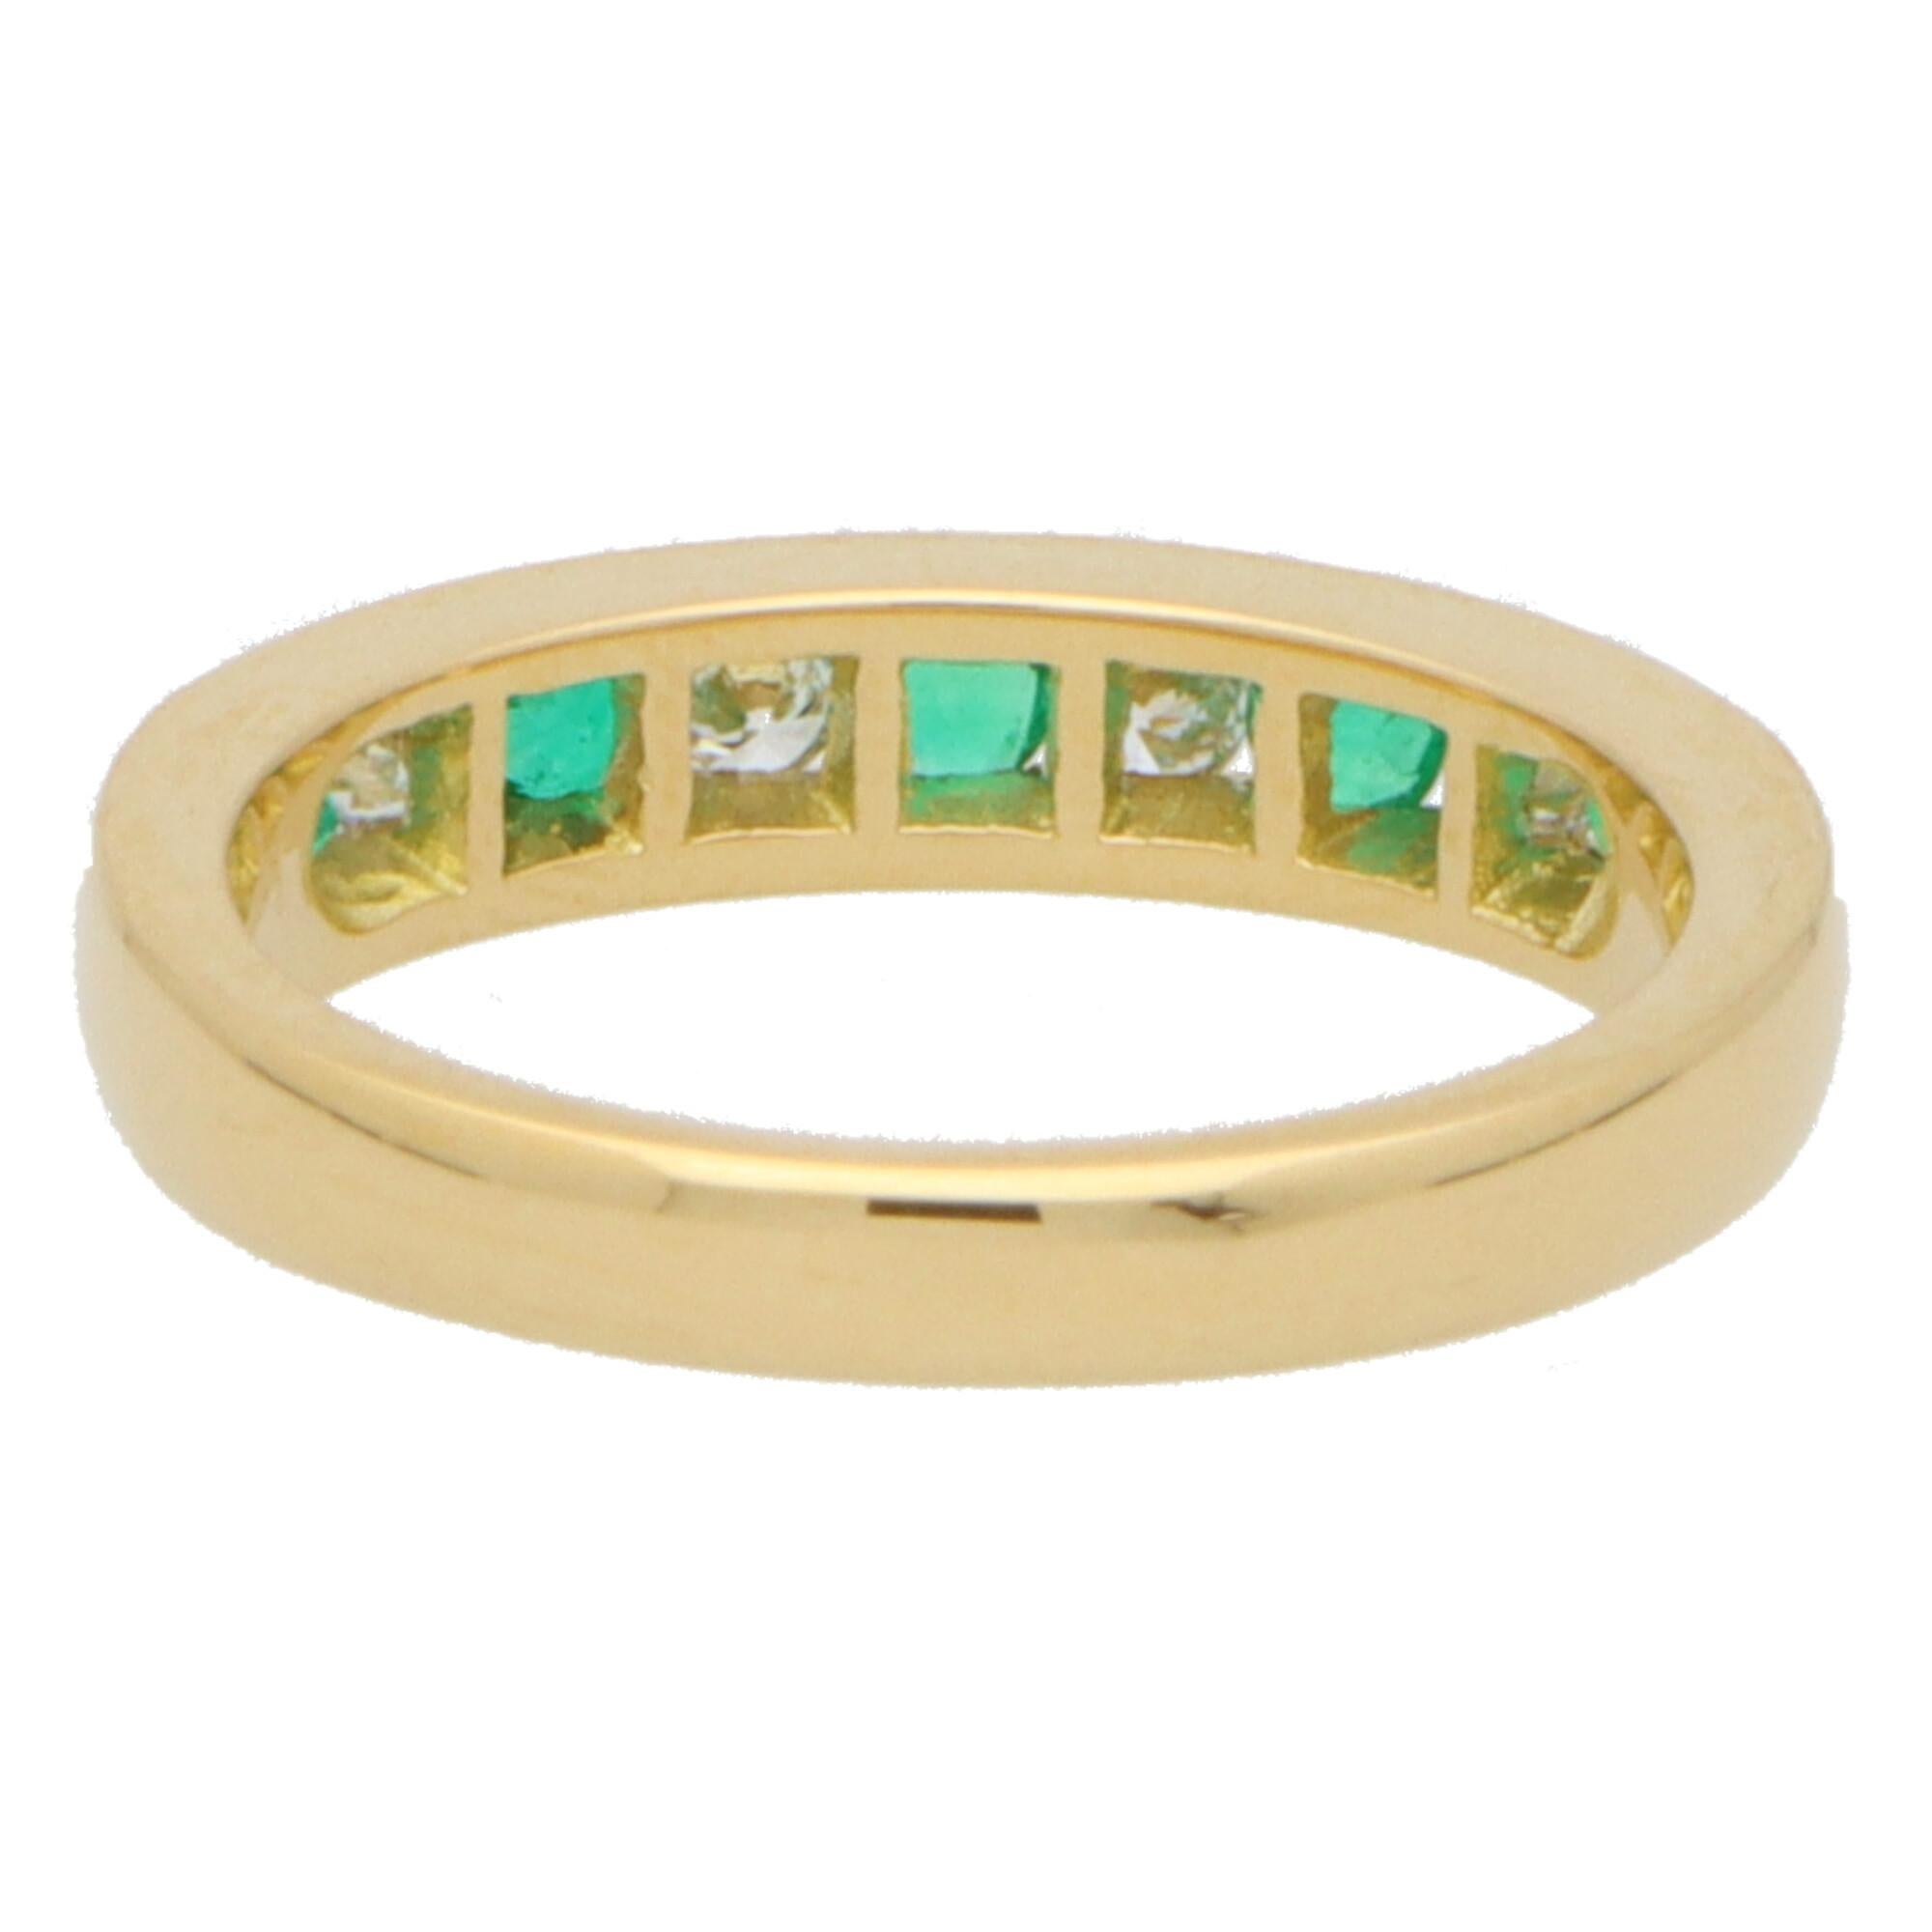 Modern Emerald and Diamond Half Eternity Band Ring Set in 18k Yellow Gold 